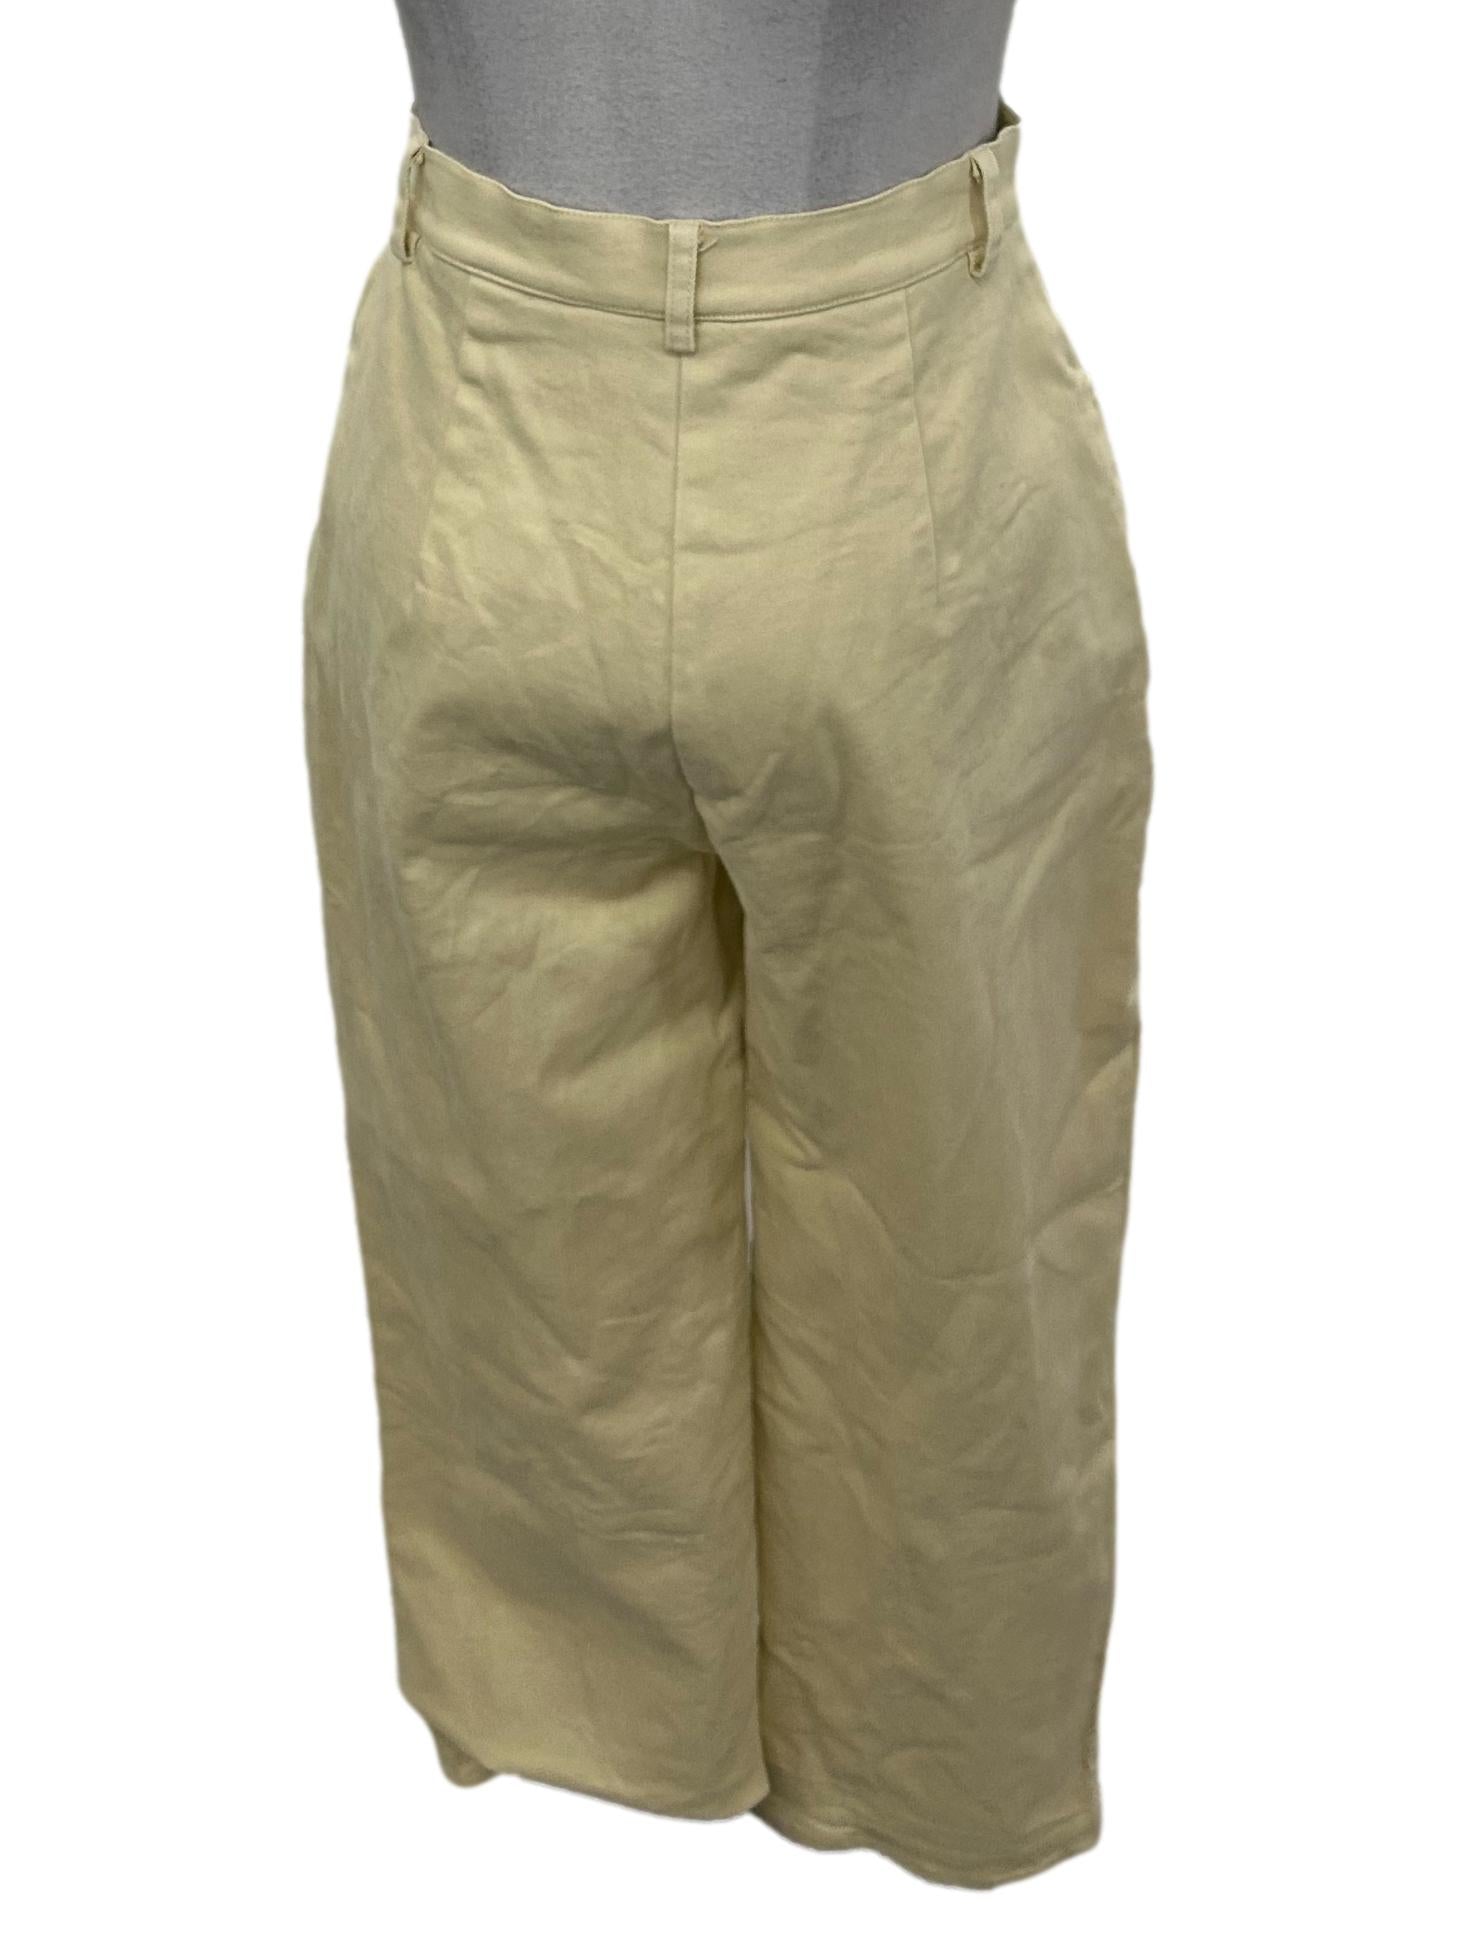 Cotton Stretch Full-Length Pants in Nude OSN